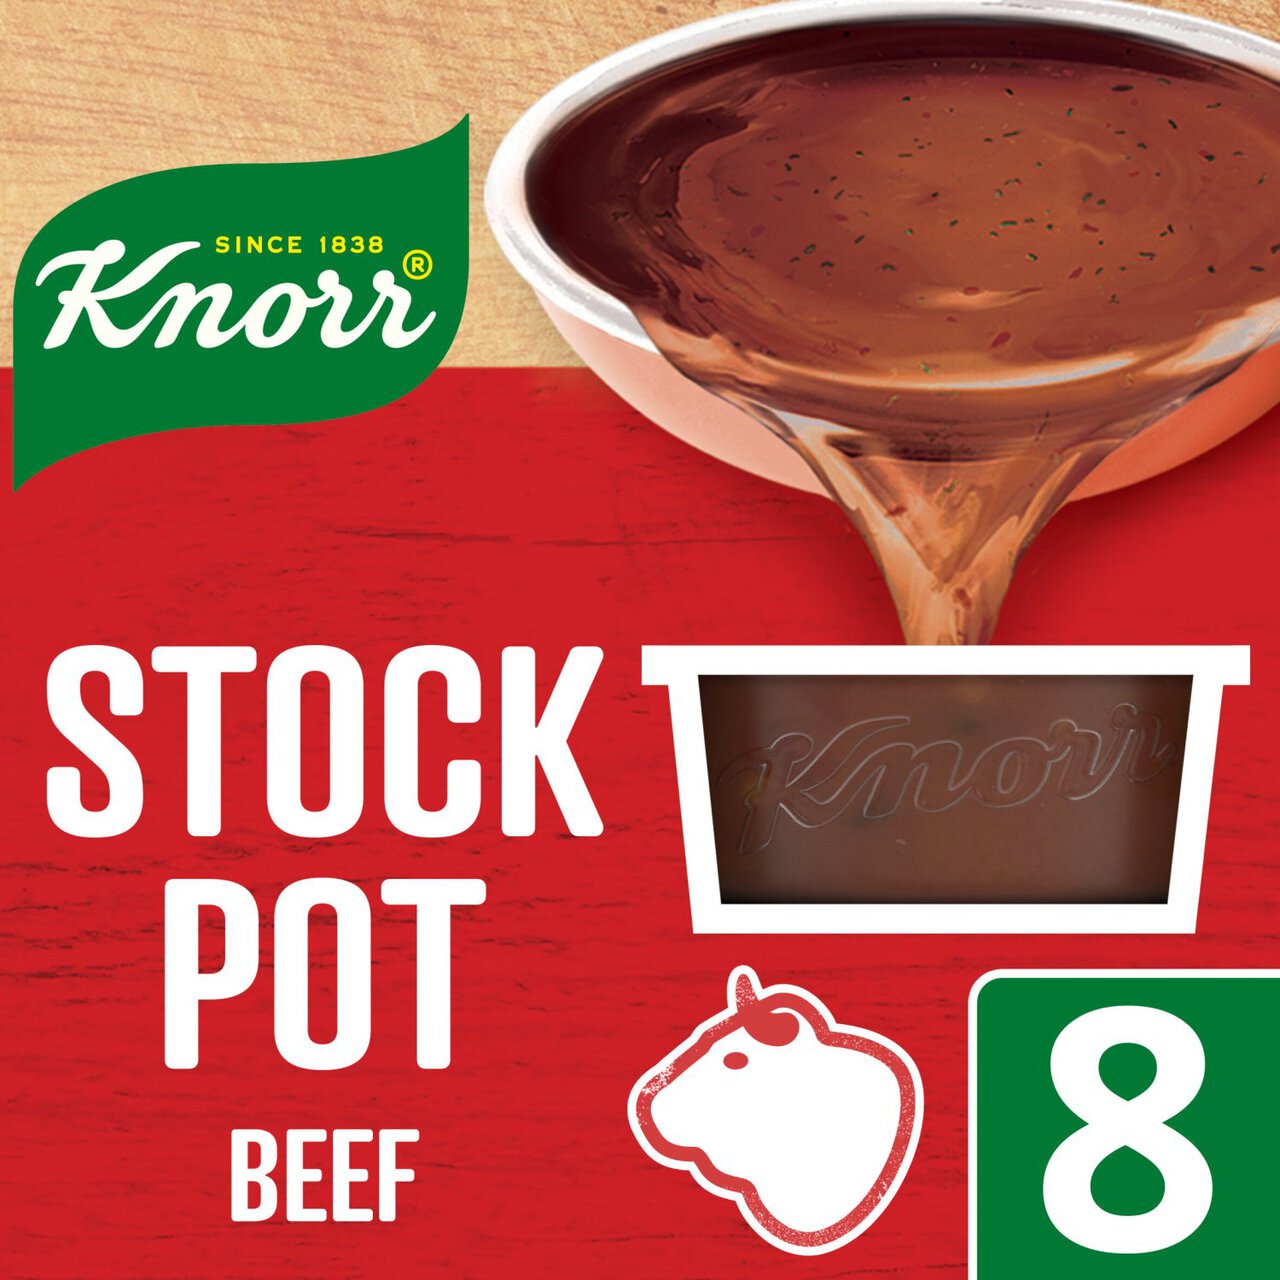 Knorr Beef Stock Pot 8 x 28g